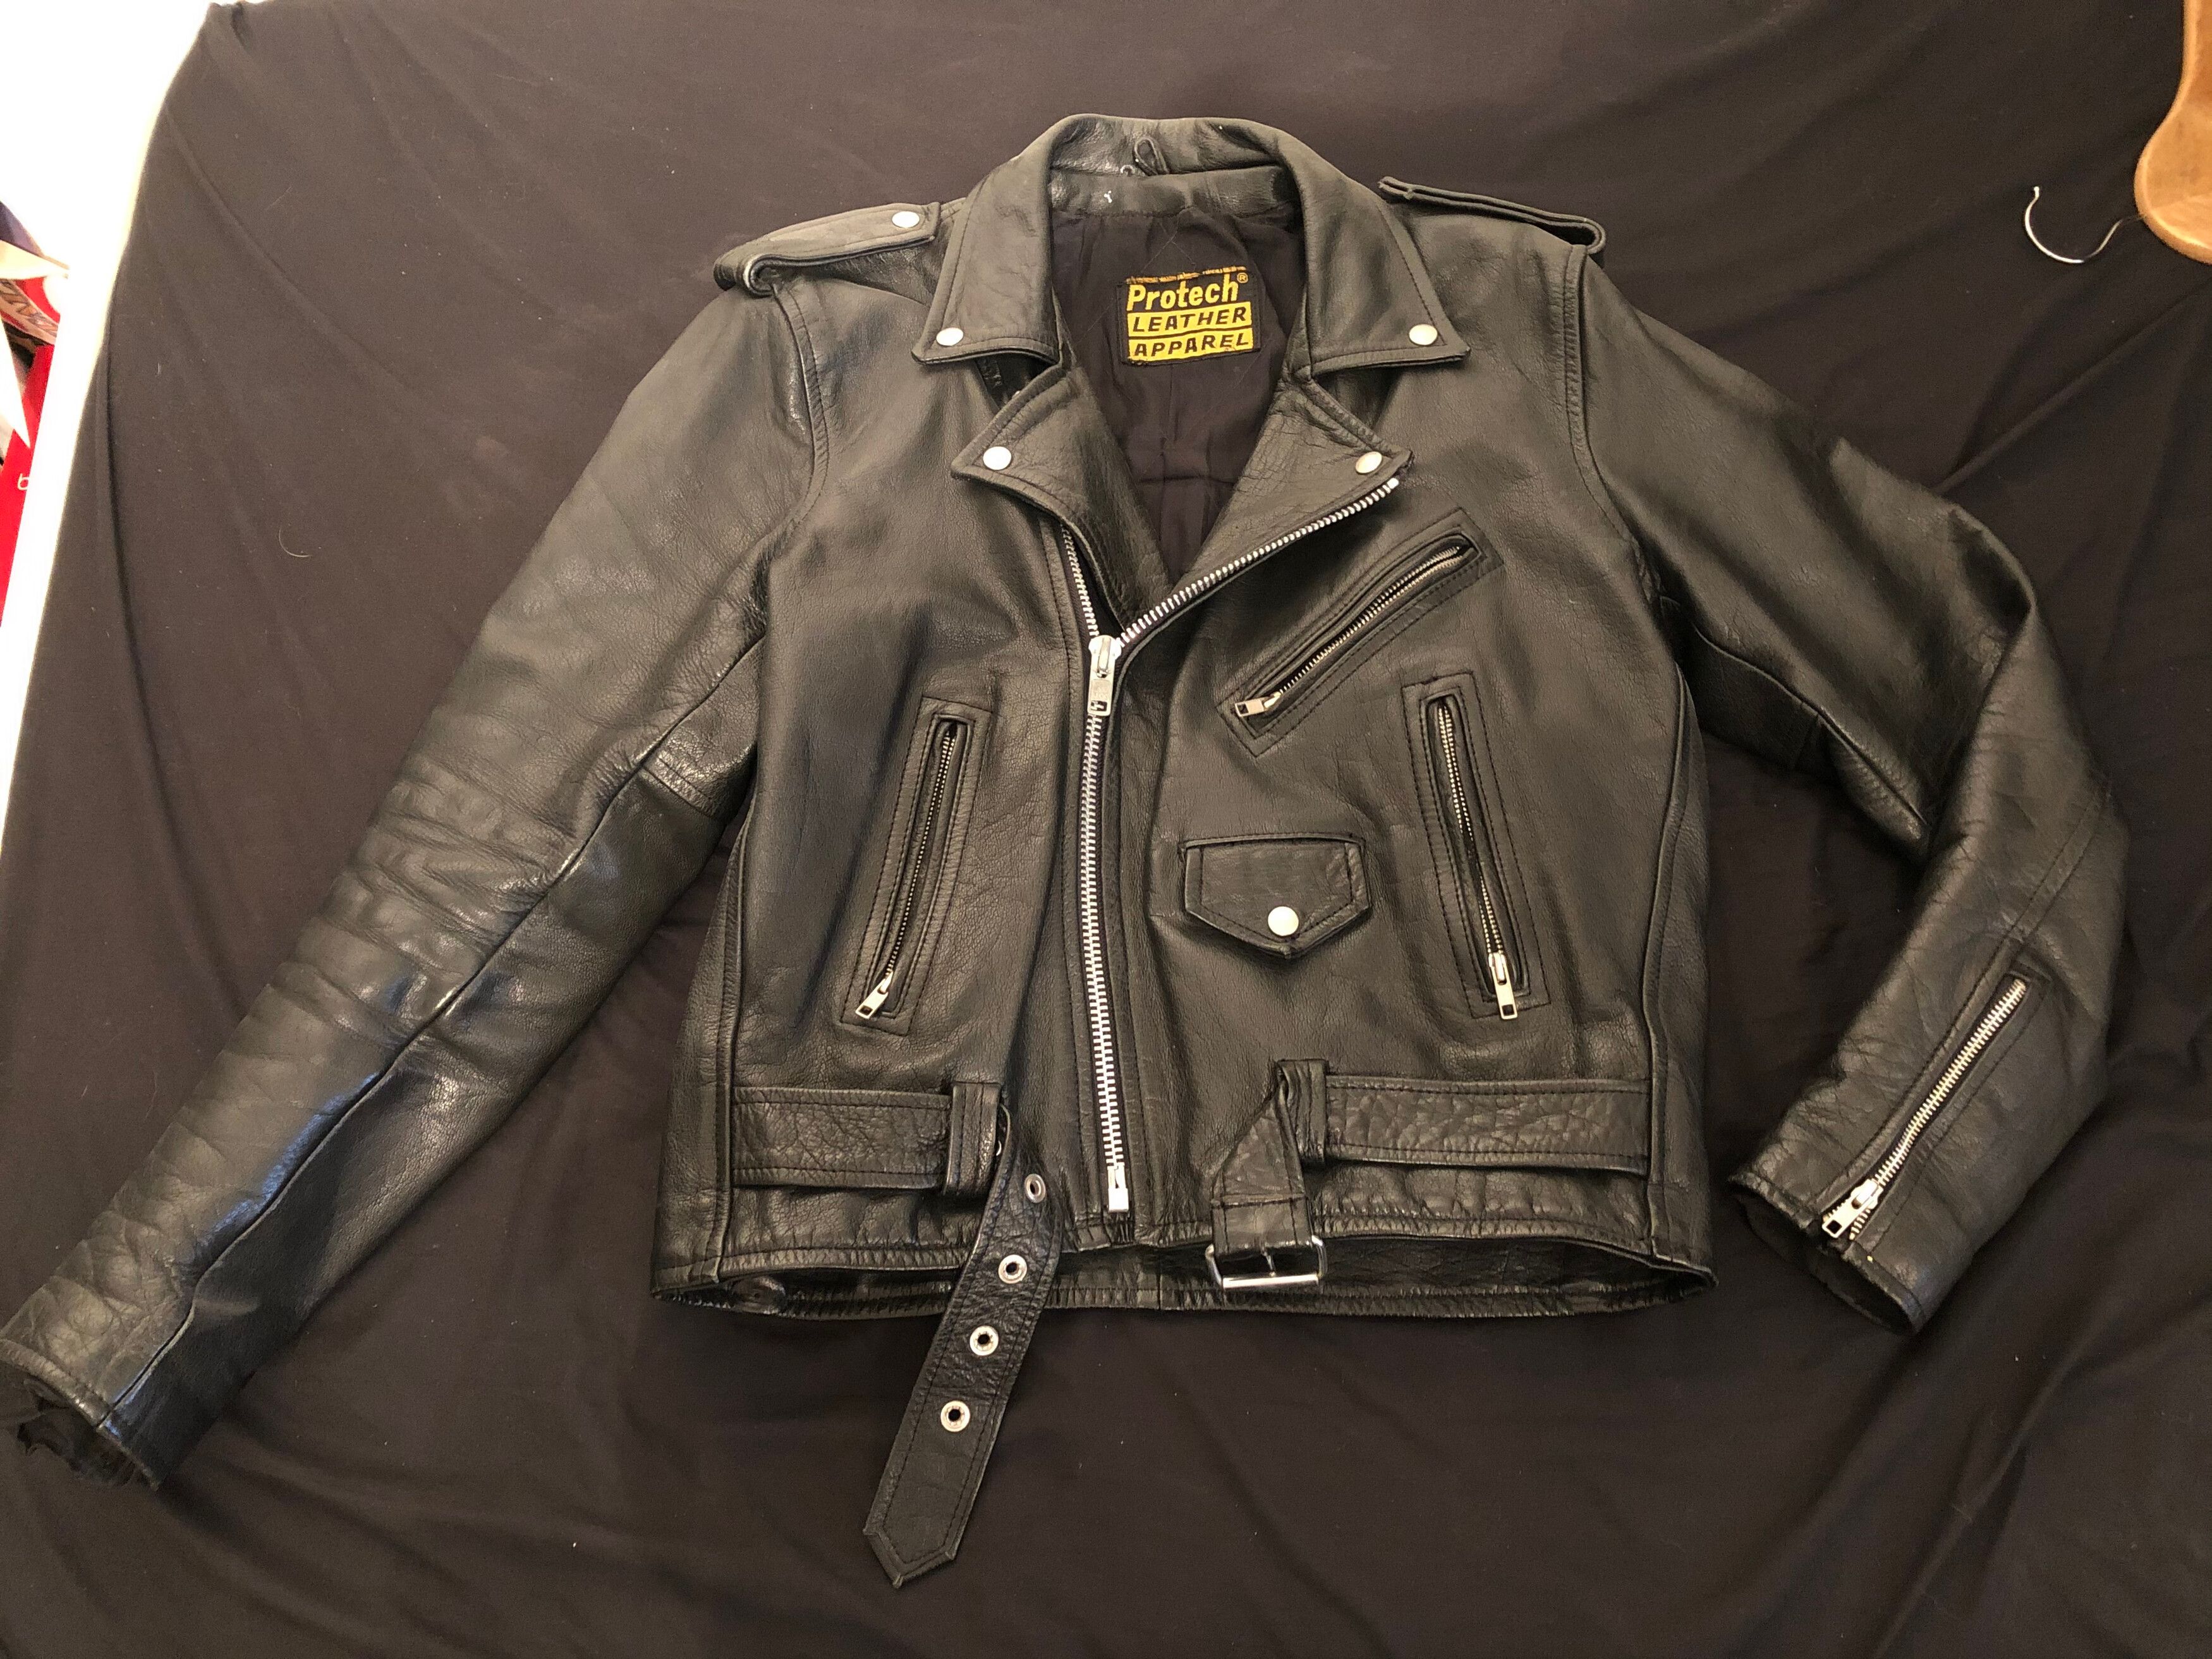 Vintage Protech Leather Apparel | Grailed